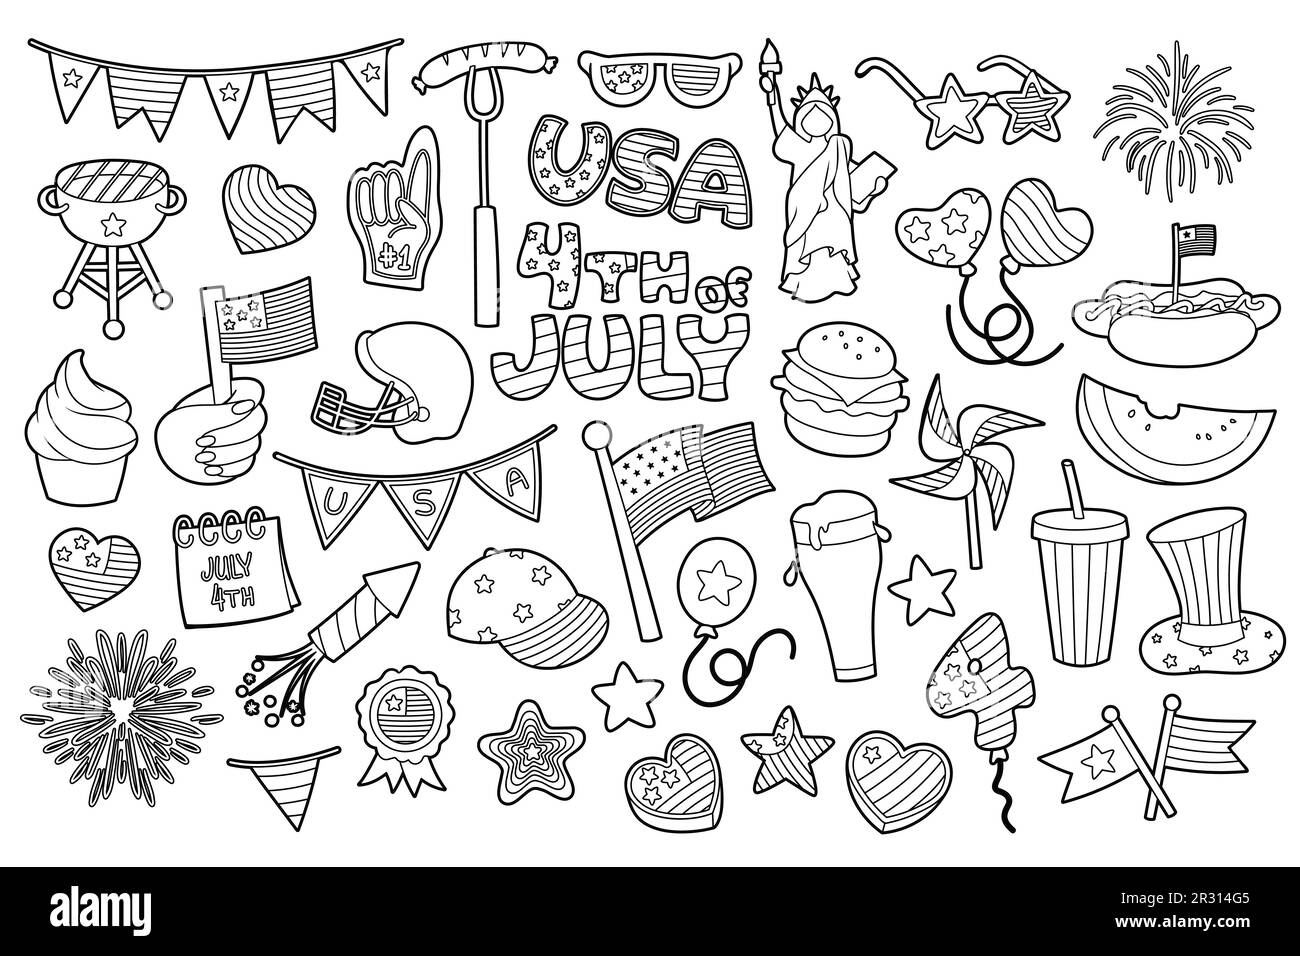 4th of July, Independence Day of United States of America celebration themed illustrations, hand drawn vector elements and objects. black and white. Stock Vector